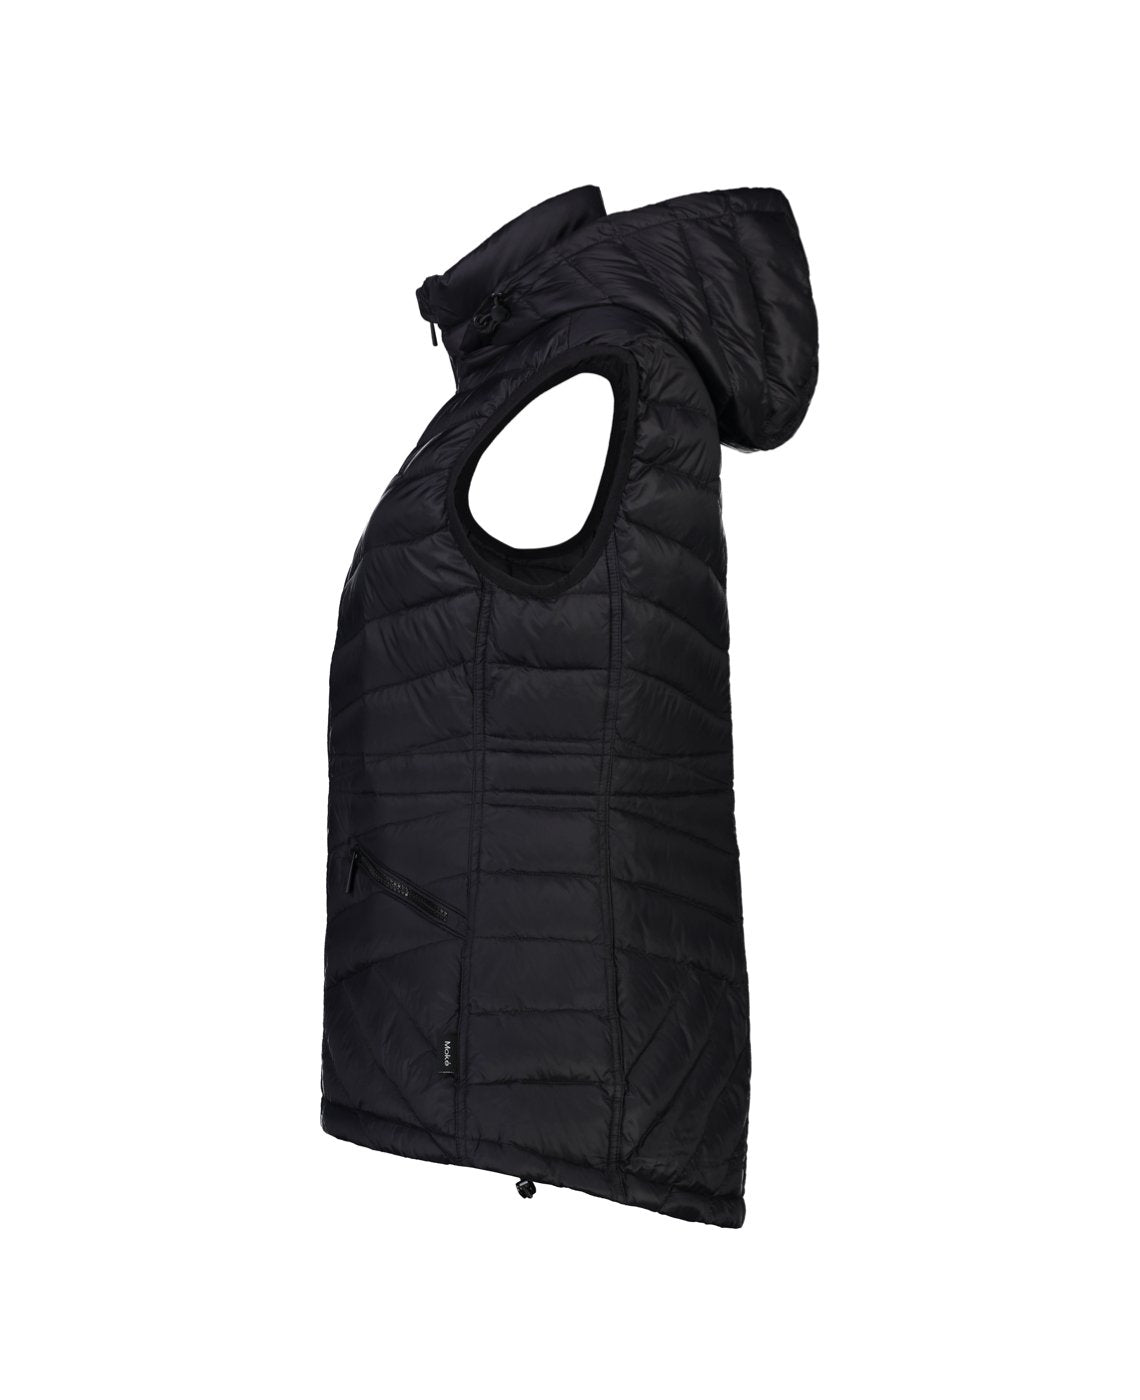 Mary-Claire Puffer Vest - Black